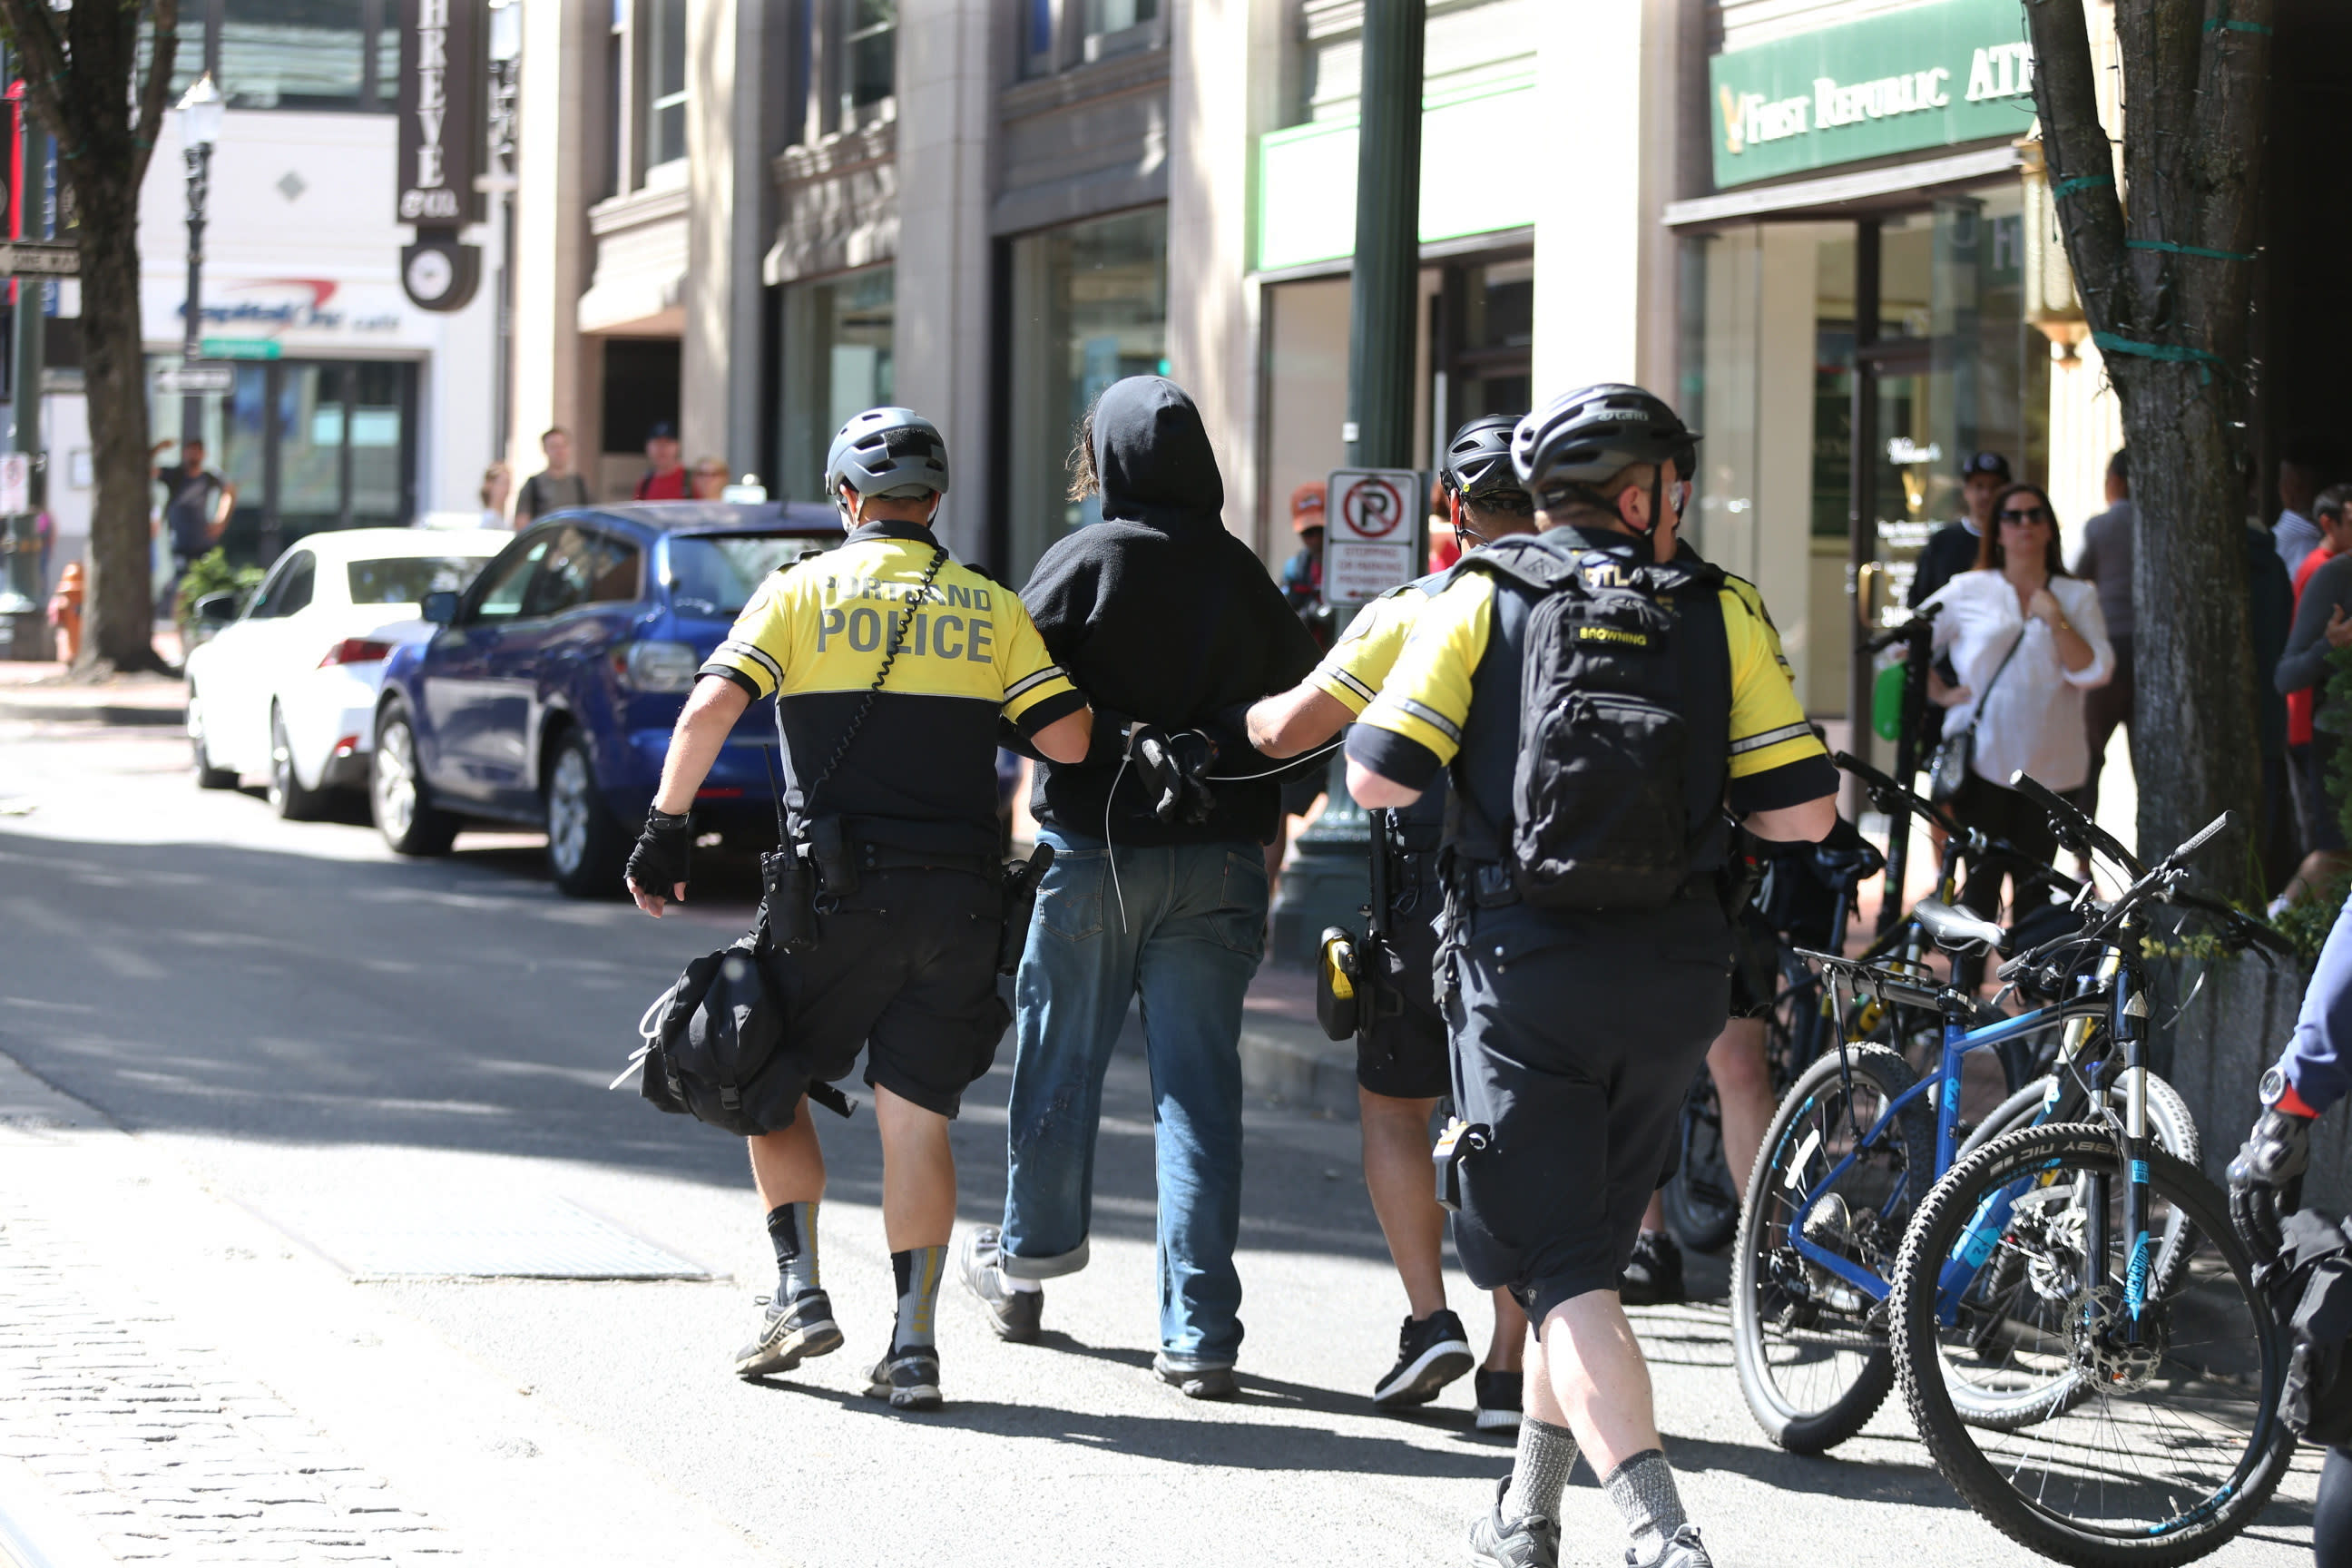 A protestor is taken into custody by police as demonstrators from at least three groups, including members of the so-called Proud Boys and anti-fascist groups, that had planned rallies or demonstrations at different sites in the city gathered, Saturday, June 29, 2019, in Portland, Ore. Competing demonstrations spilled into the streets of downtown Portland, with fights breaking out in places as marchers clashed. (Dave Killen/The Oregonian via AP)